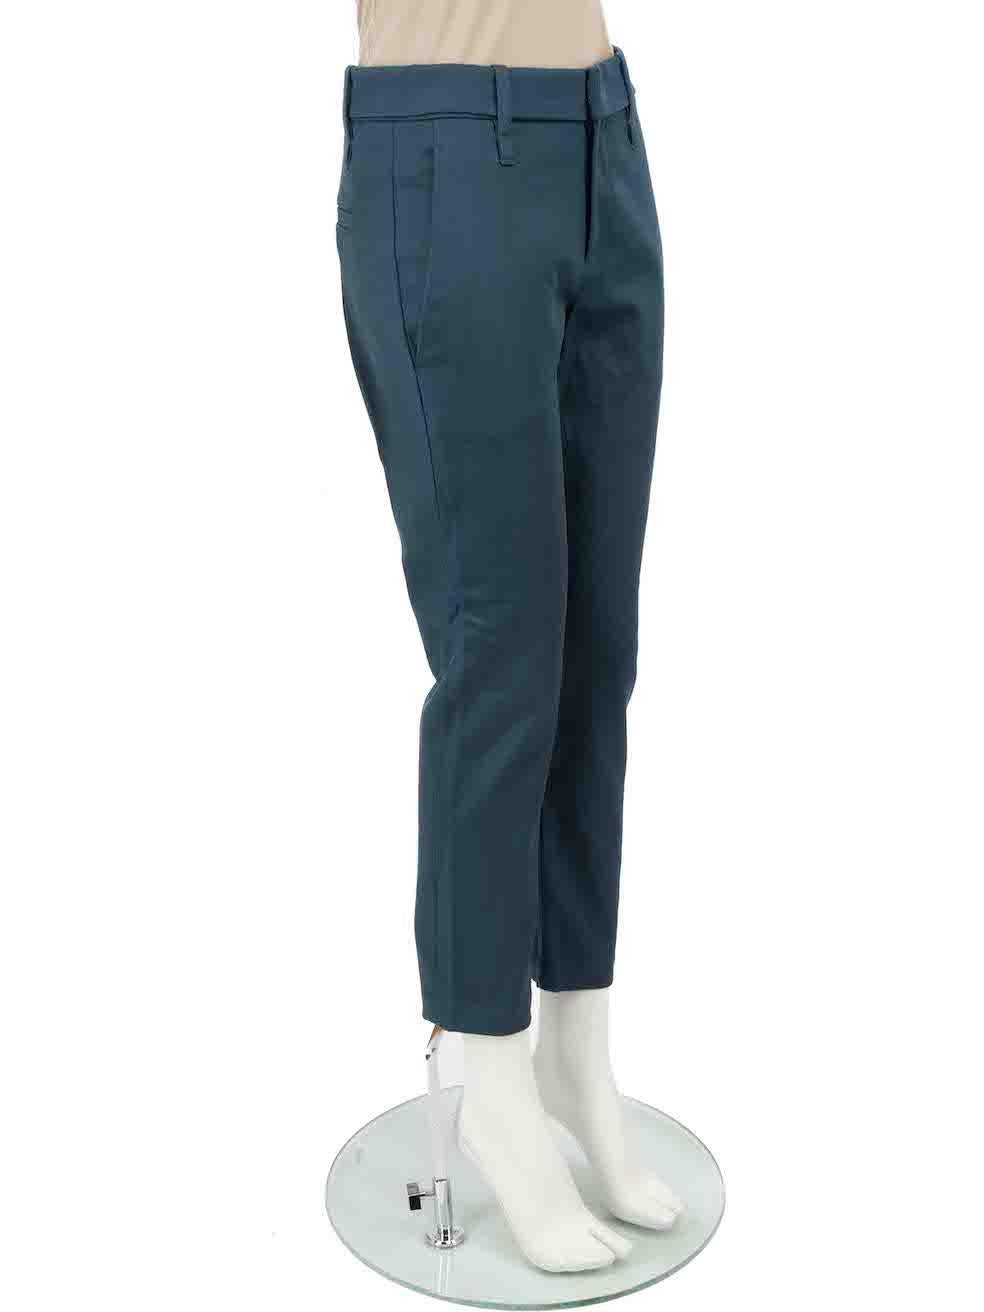 CONDITION is Very good. Hardly any visible wear to trousers is evident on this used Brunello Cucinelli designer resale item.
 
 Details
 Blue
 Cotton
 Trousers
 Slim fit
 Mid rise
 2x Side pockets
 2x Back pockets
 Fly zip, hook and button